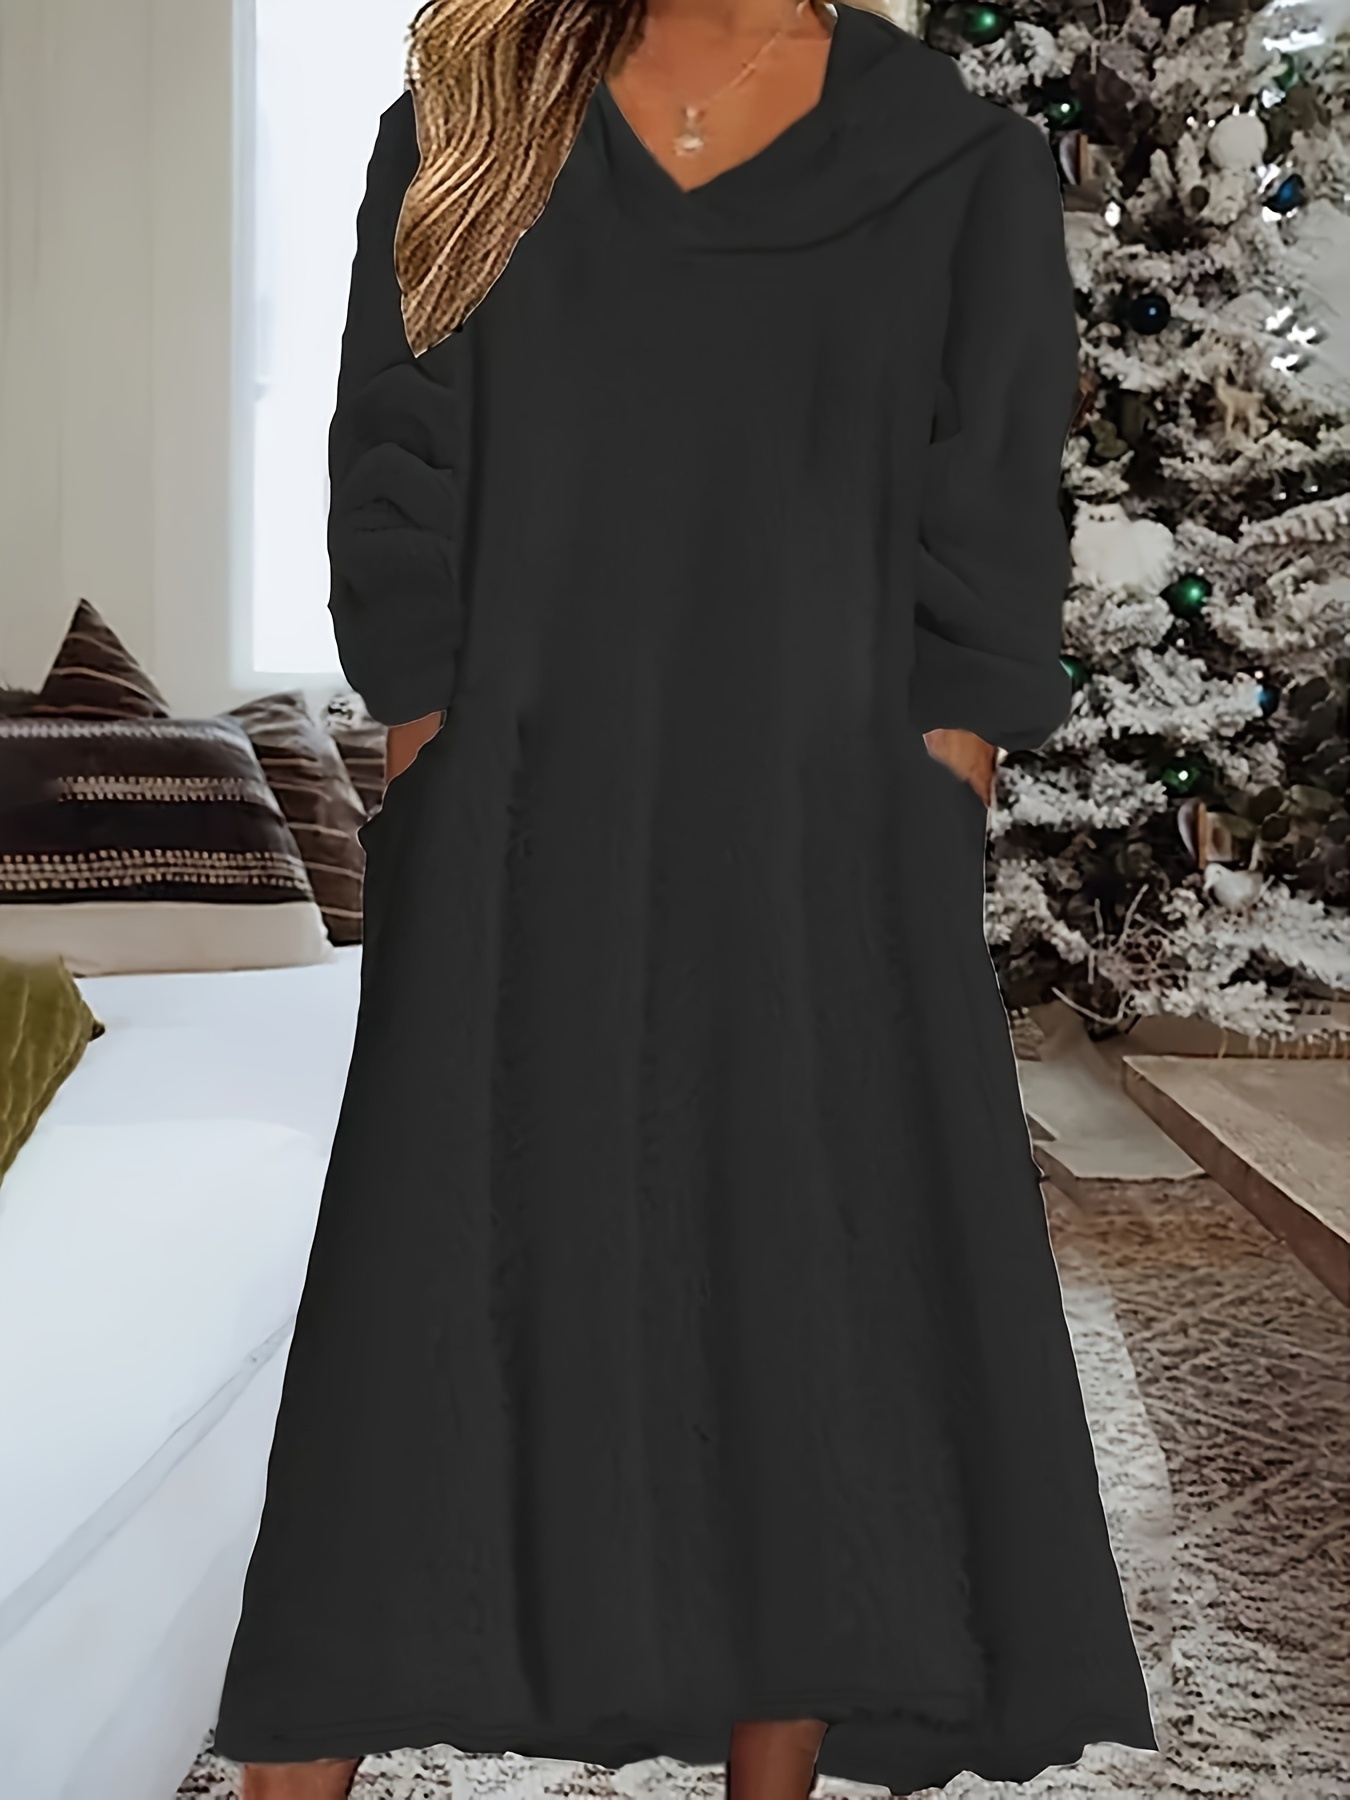 teddy hooded dress casual long sleeve winter warm dress womens clothing details 6